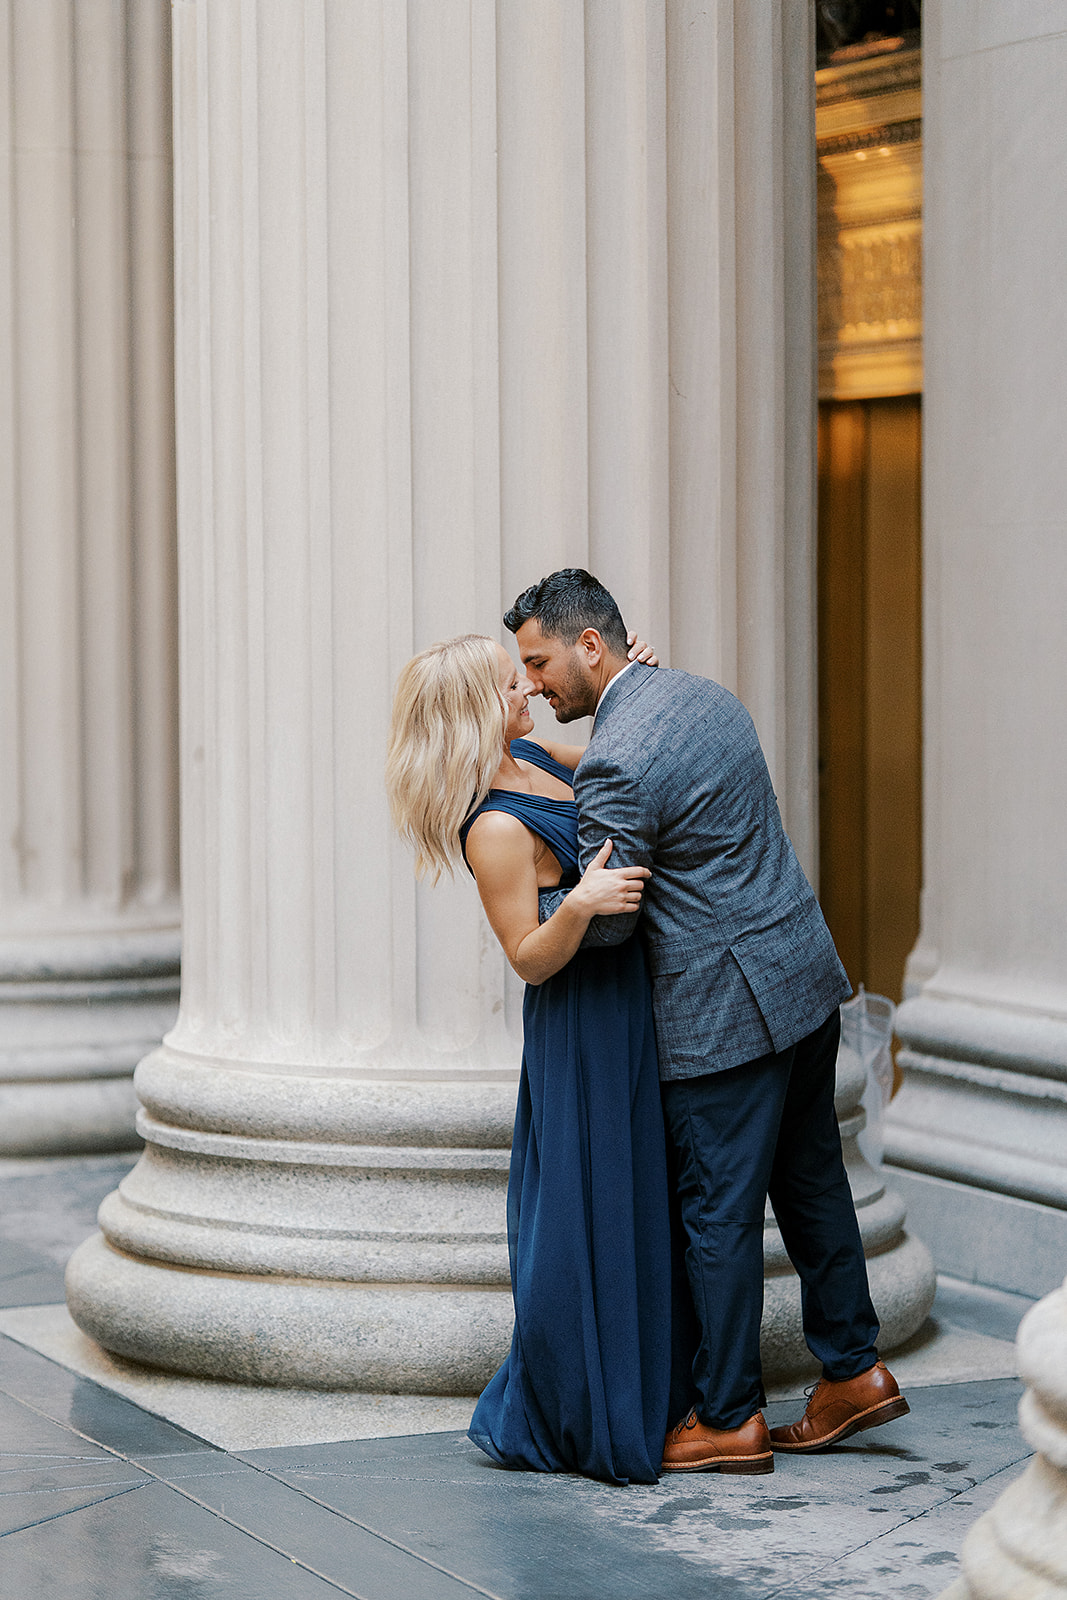 Board of Trade Engagement Session Downtown Chicago | Chernogorov Photography Destination Wedding Photographers